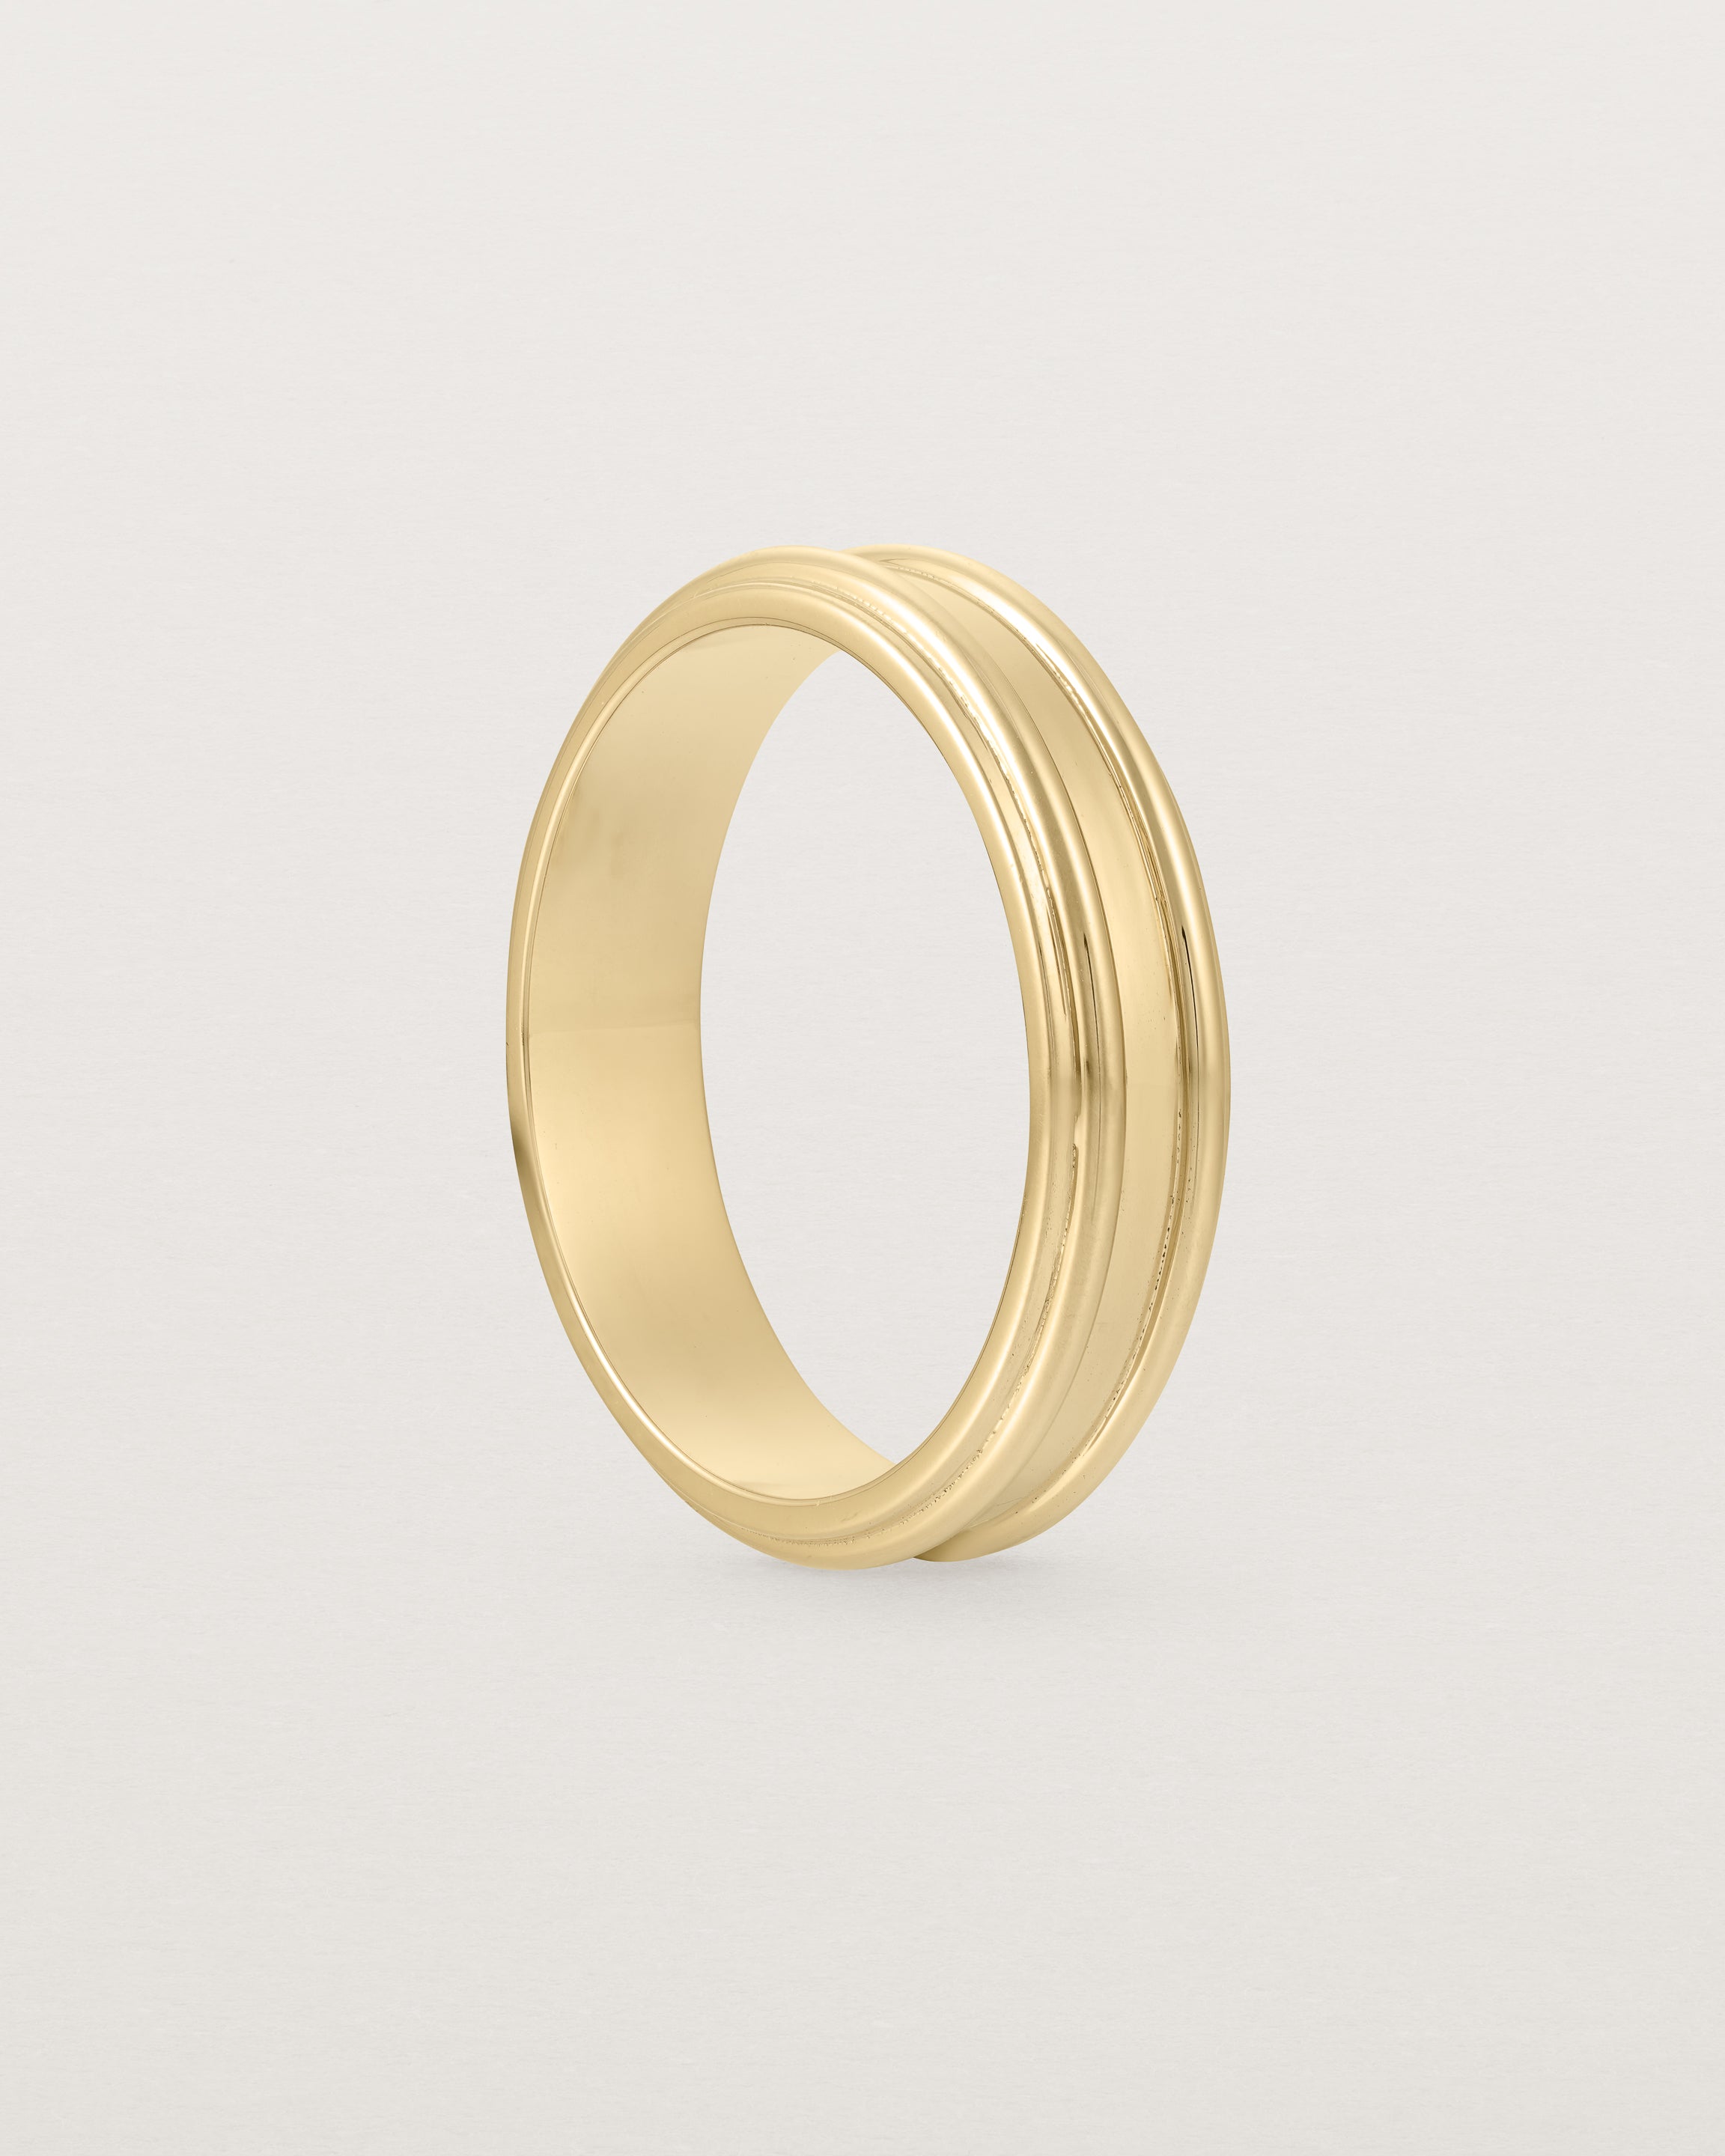 Standing view of the Border Wedding Ring | 5mm | Yellow Gold.